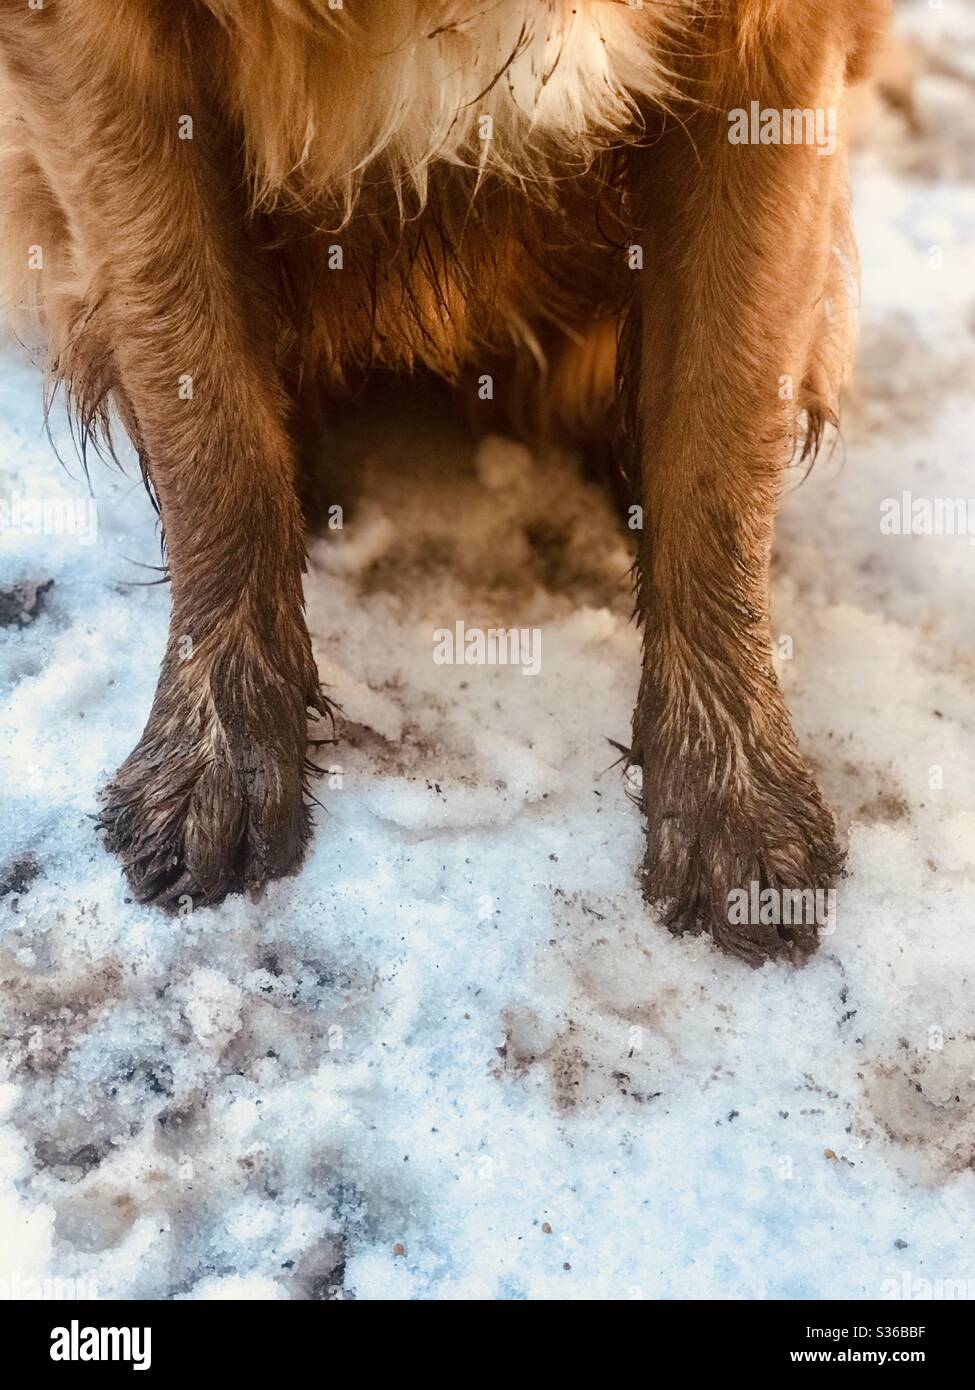 A golden retriever dog sits outside in the snow with muddy paws. Stock Photo